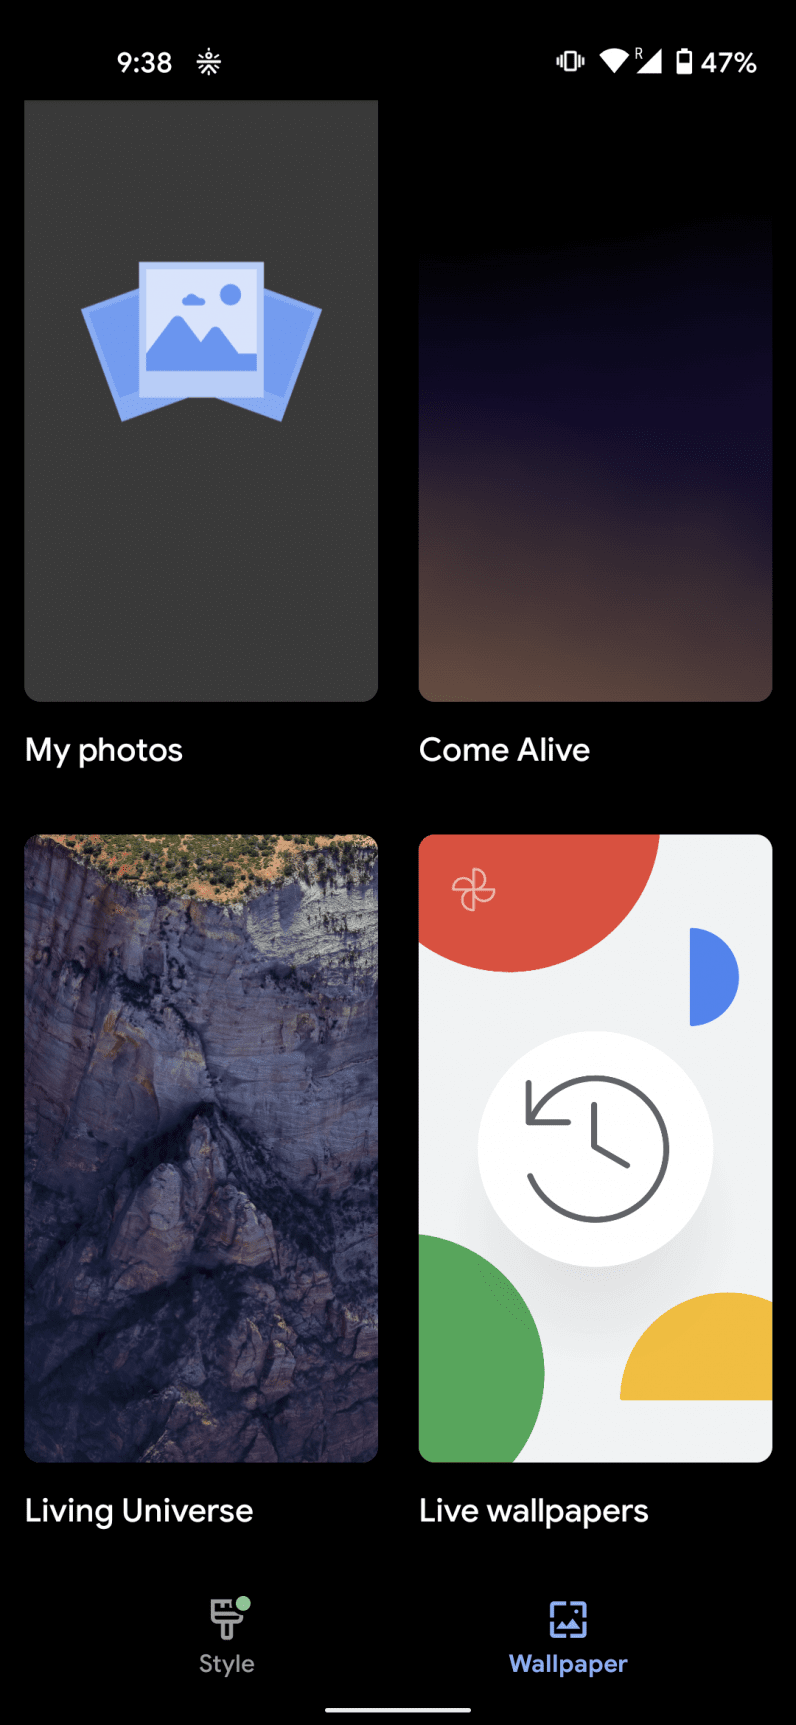 How to set your Google Photos images as a live wallpaper on Android